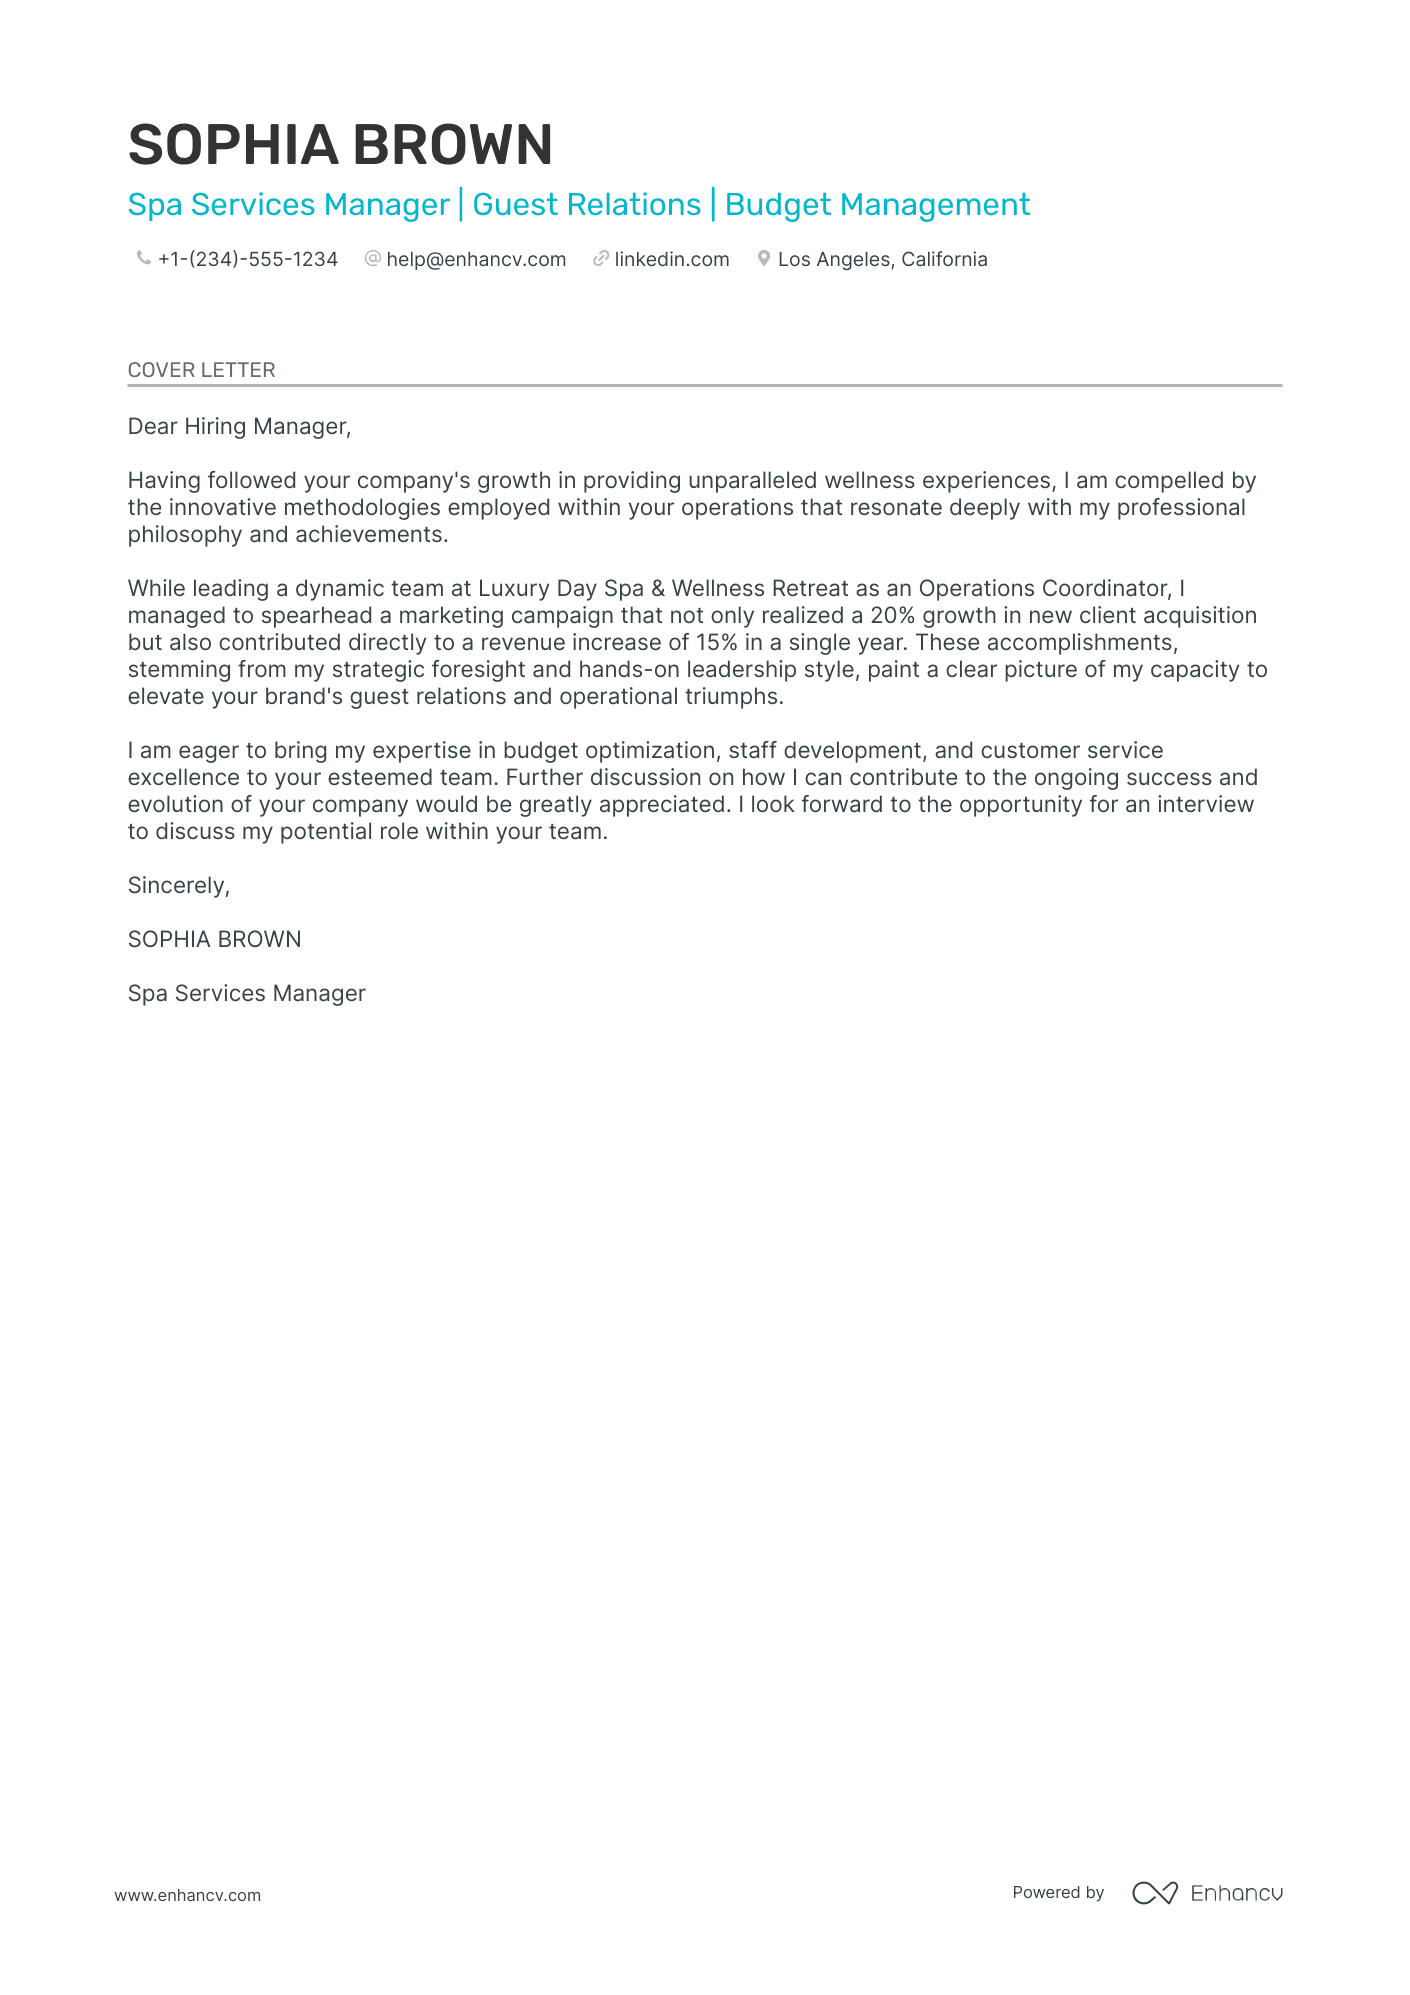 Spa Manager cover letter